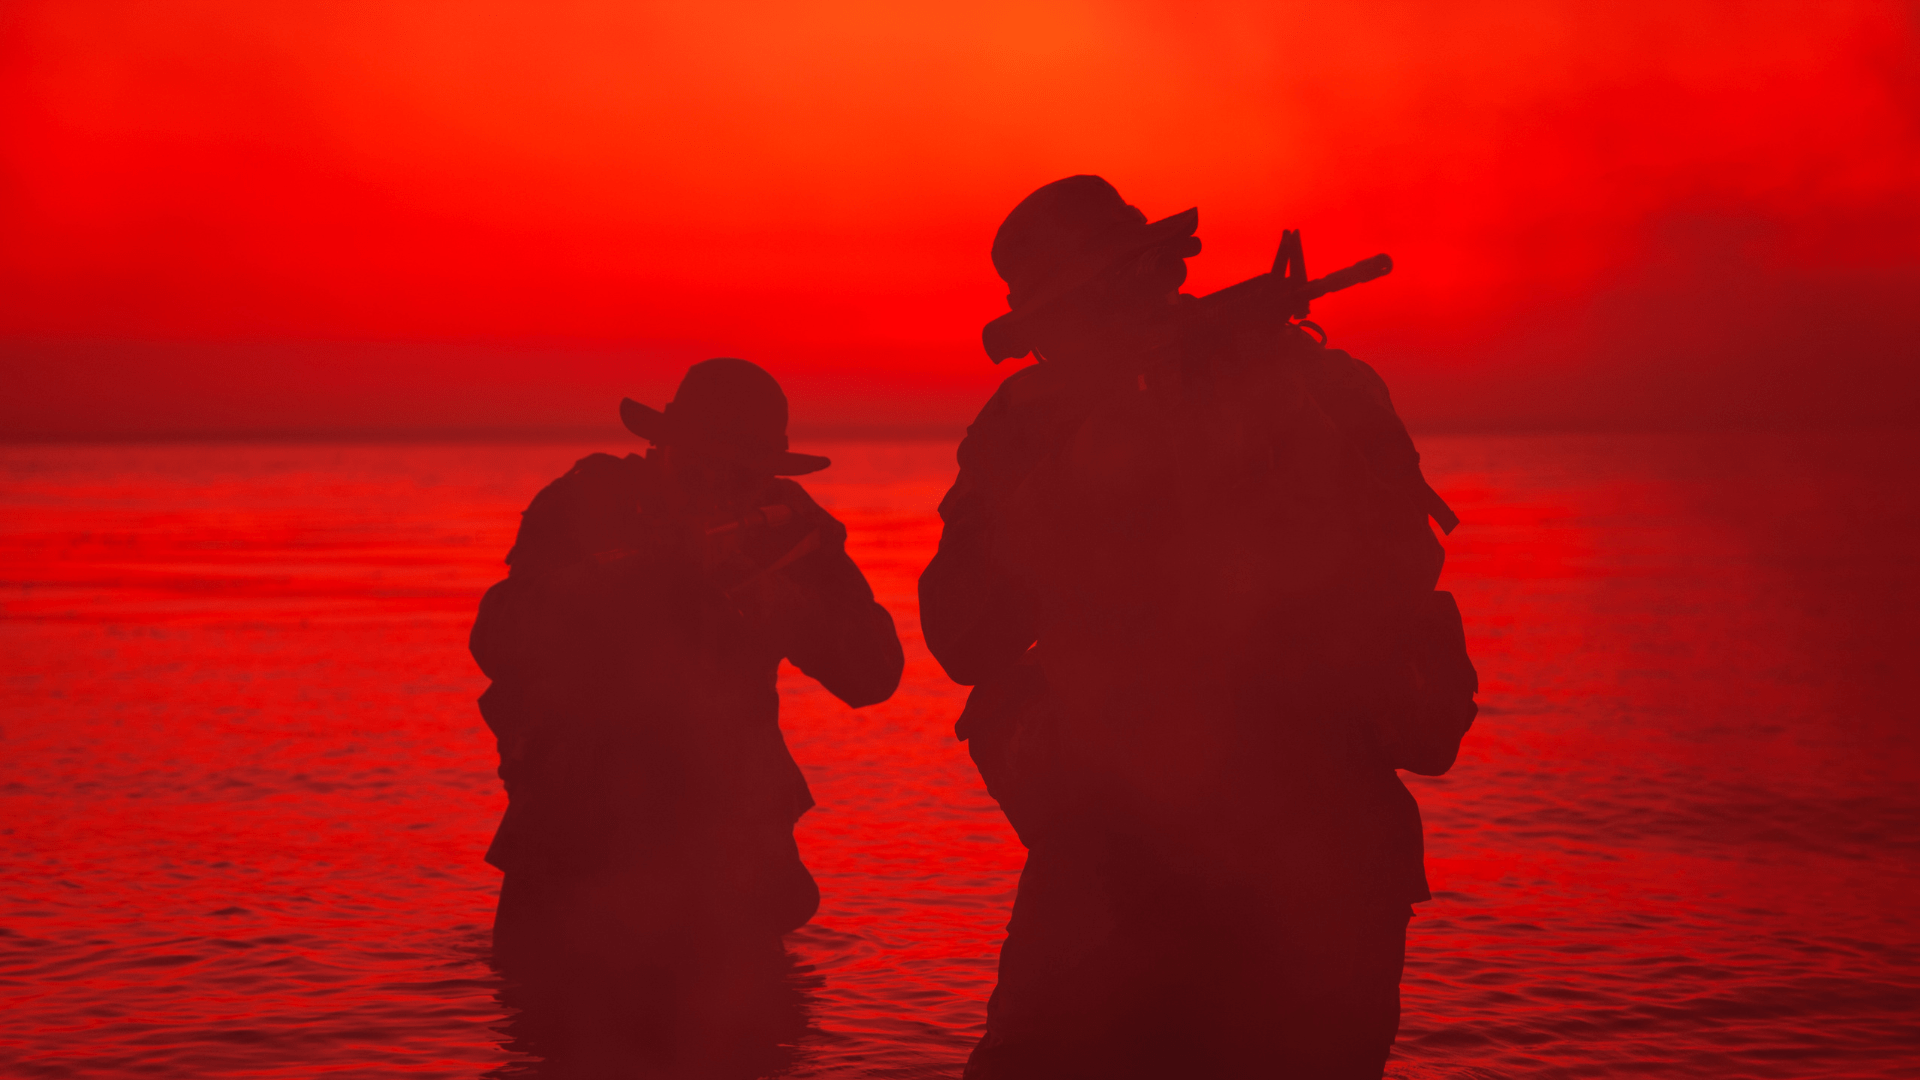 soldiers at night in red lighting